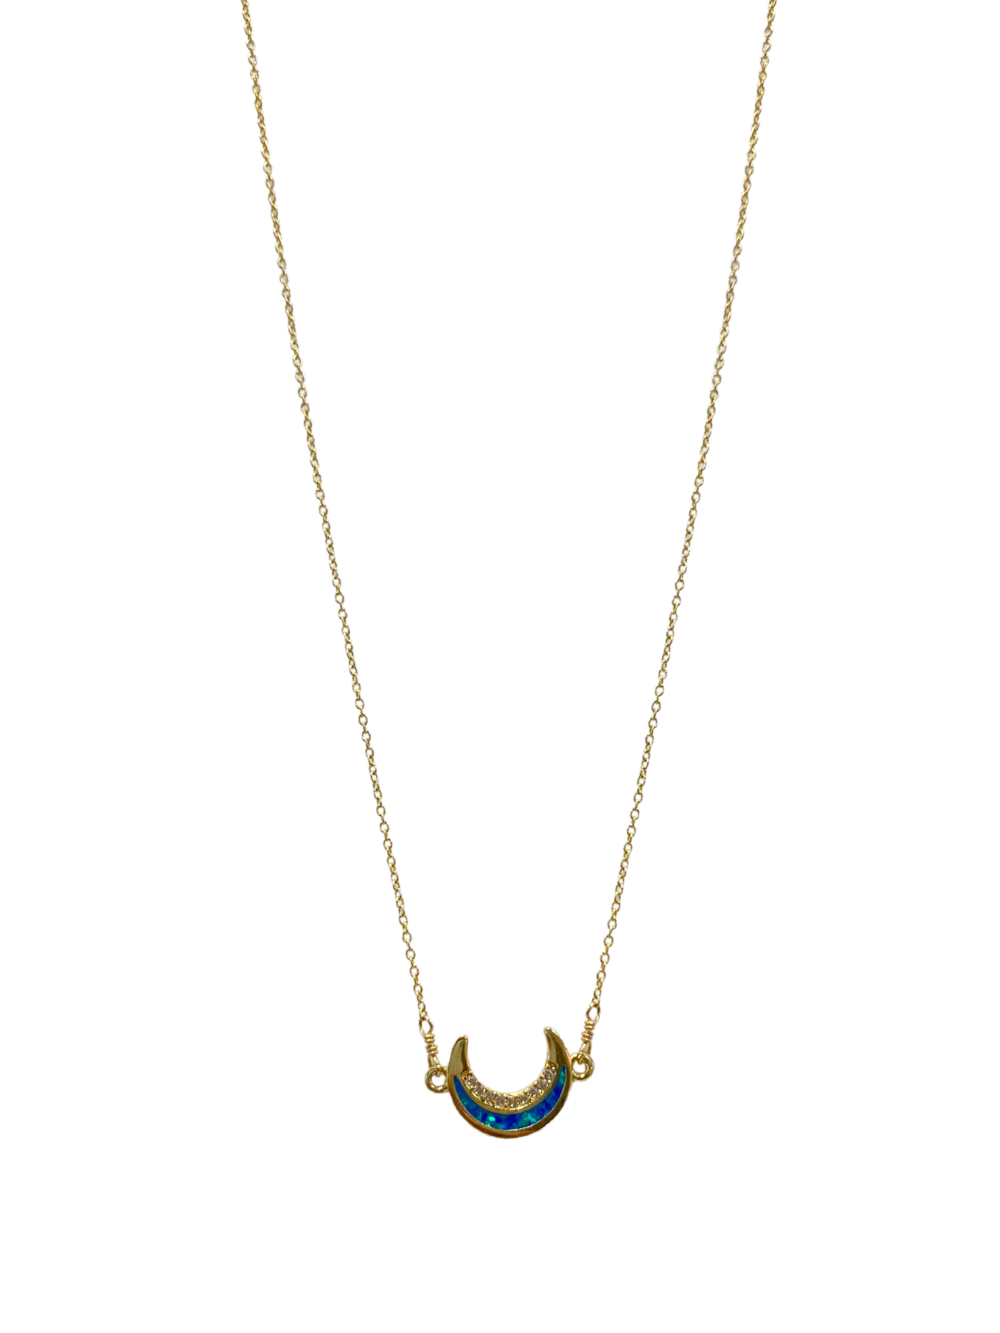 The Saylor Necklace